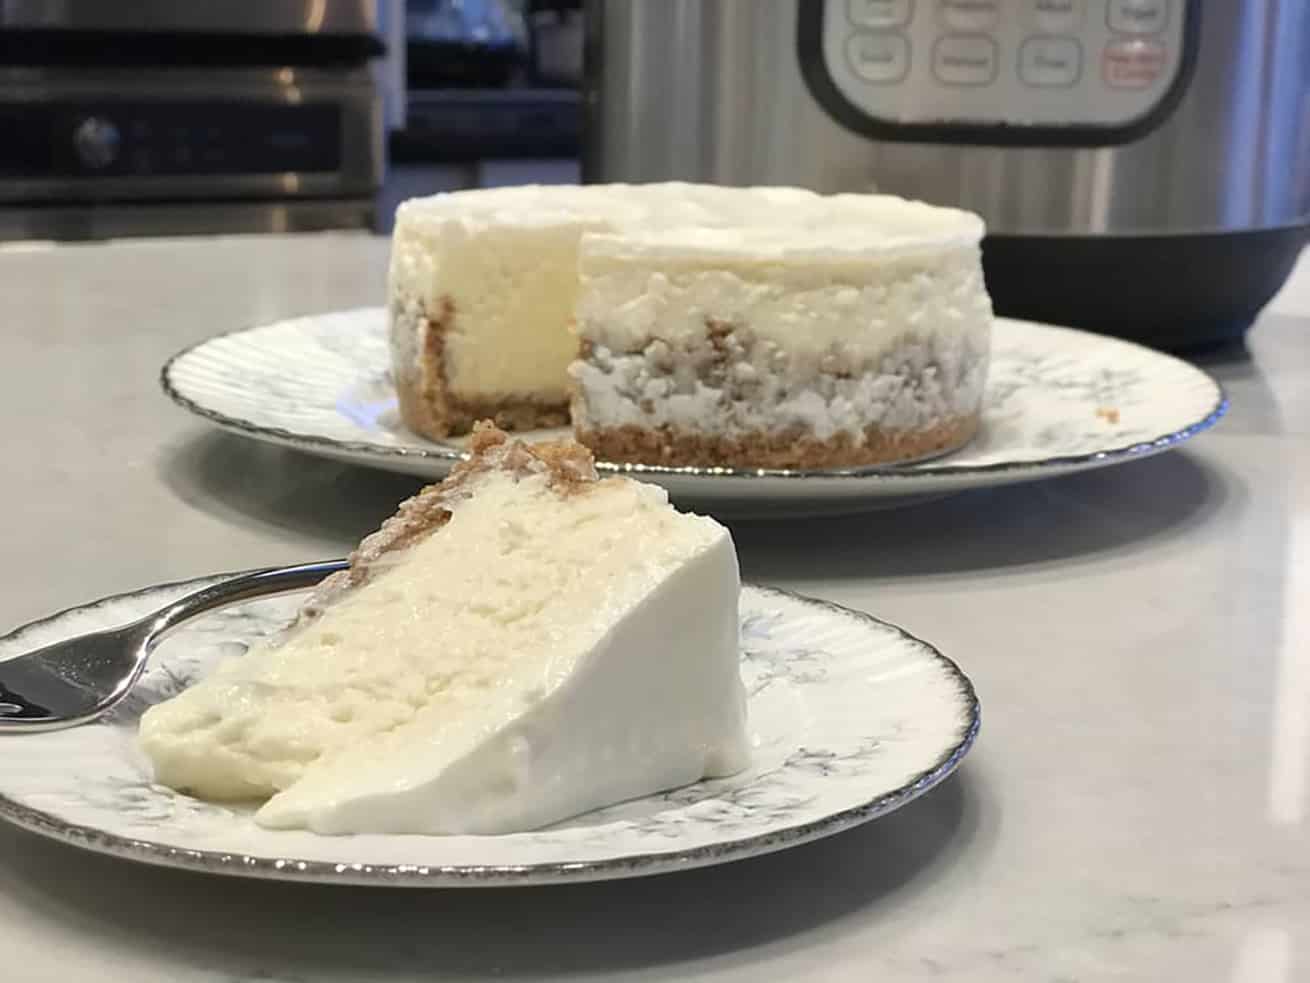 New York Cheesecake made in an Instant Pot